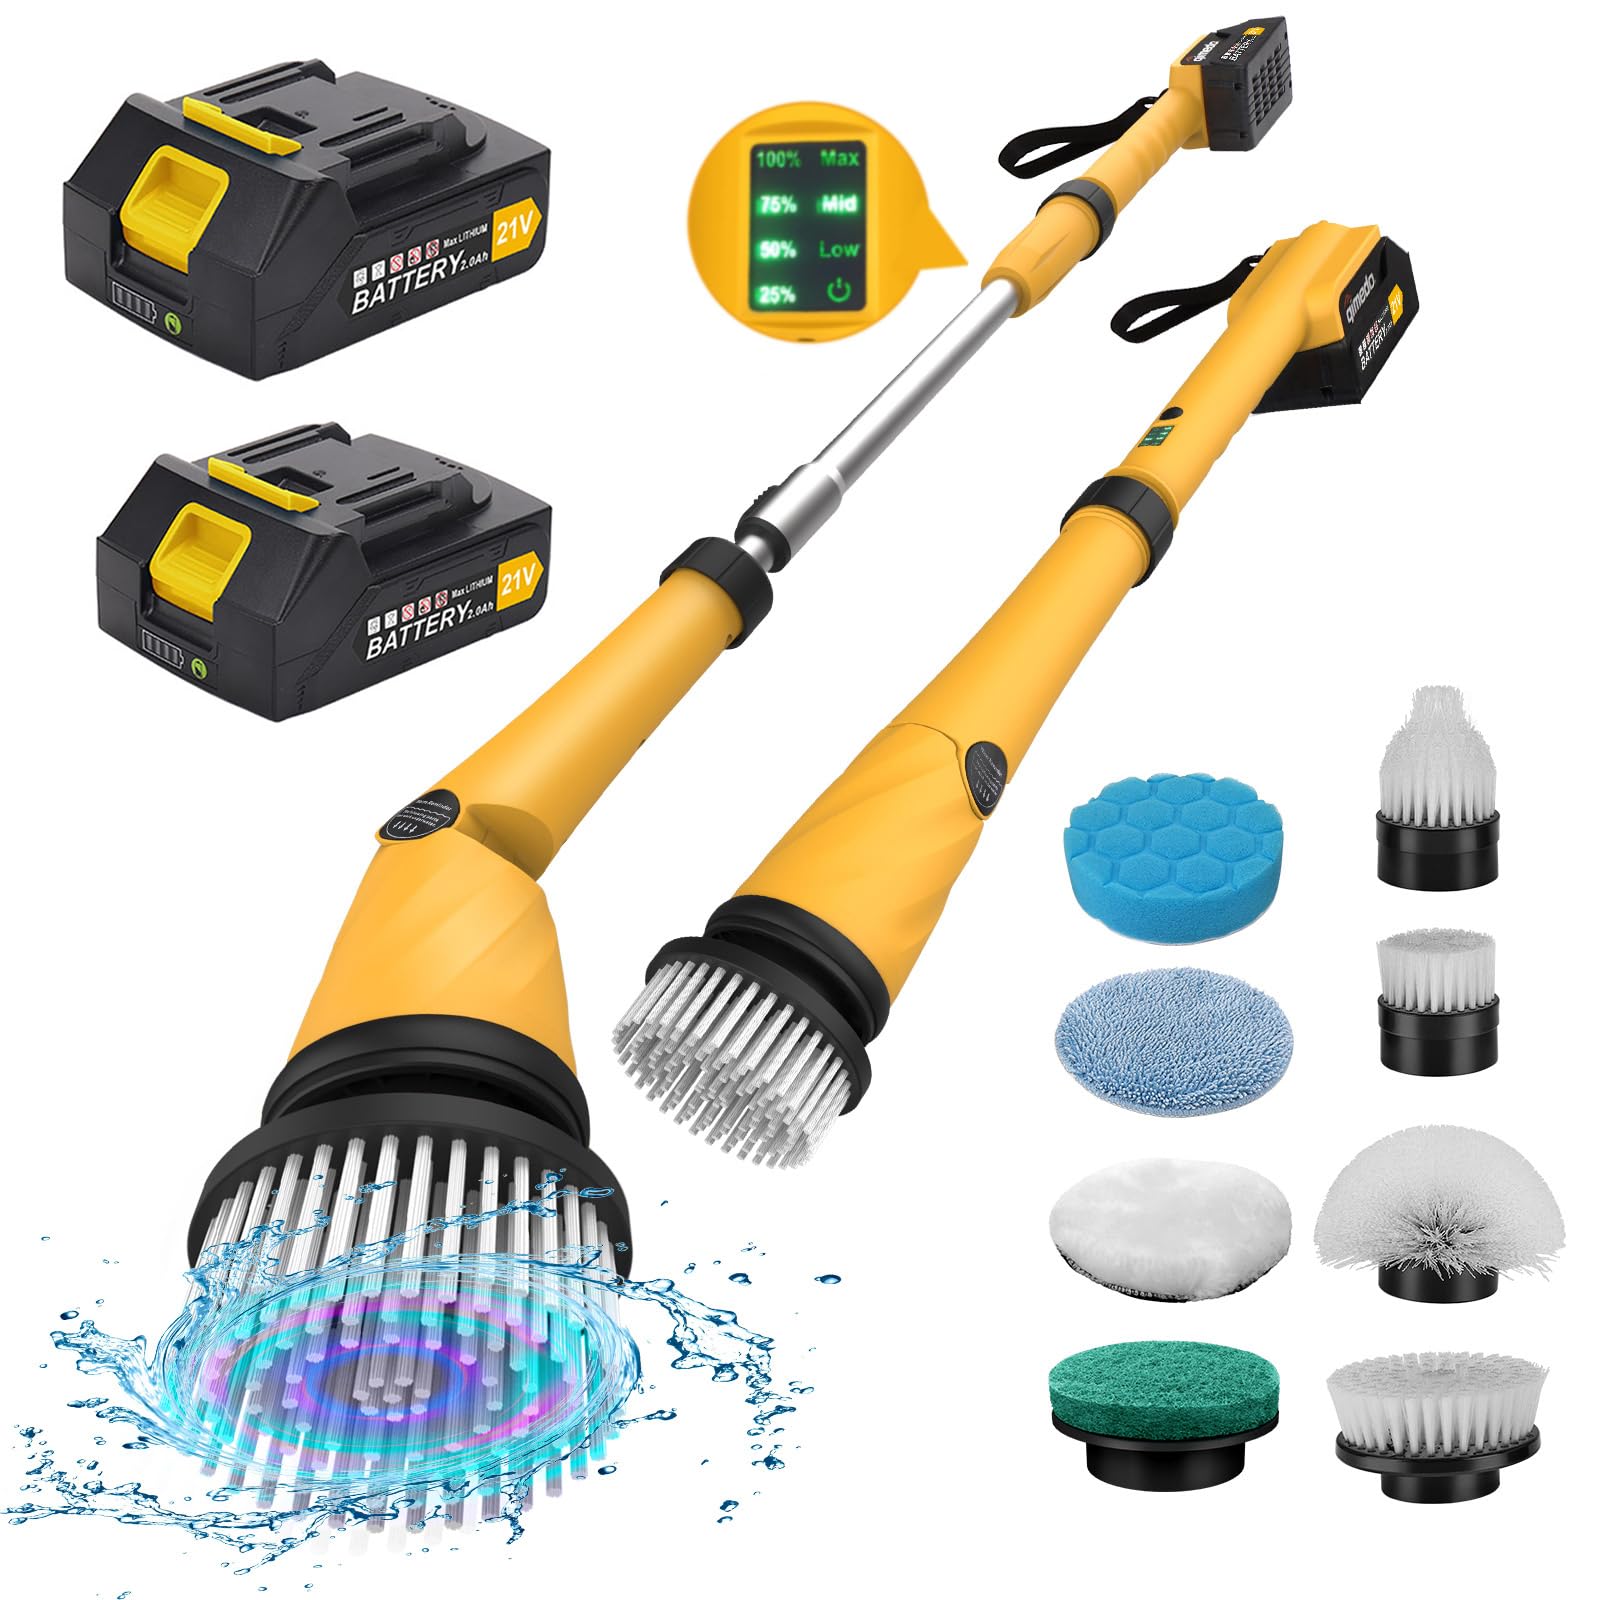 1200 RPM High Power Electric Scrubber for Cleaning Cordless Cleaning Brush with LED Display and two batteries $53.19